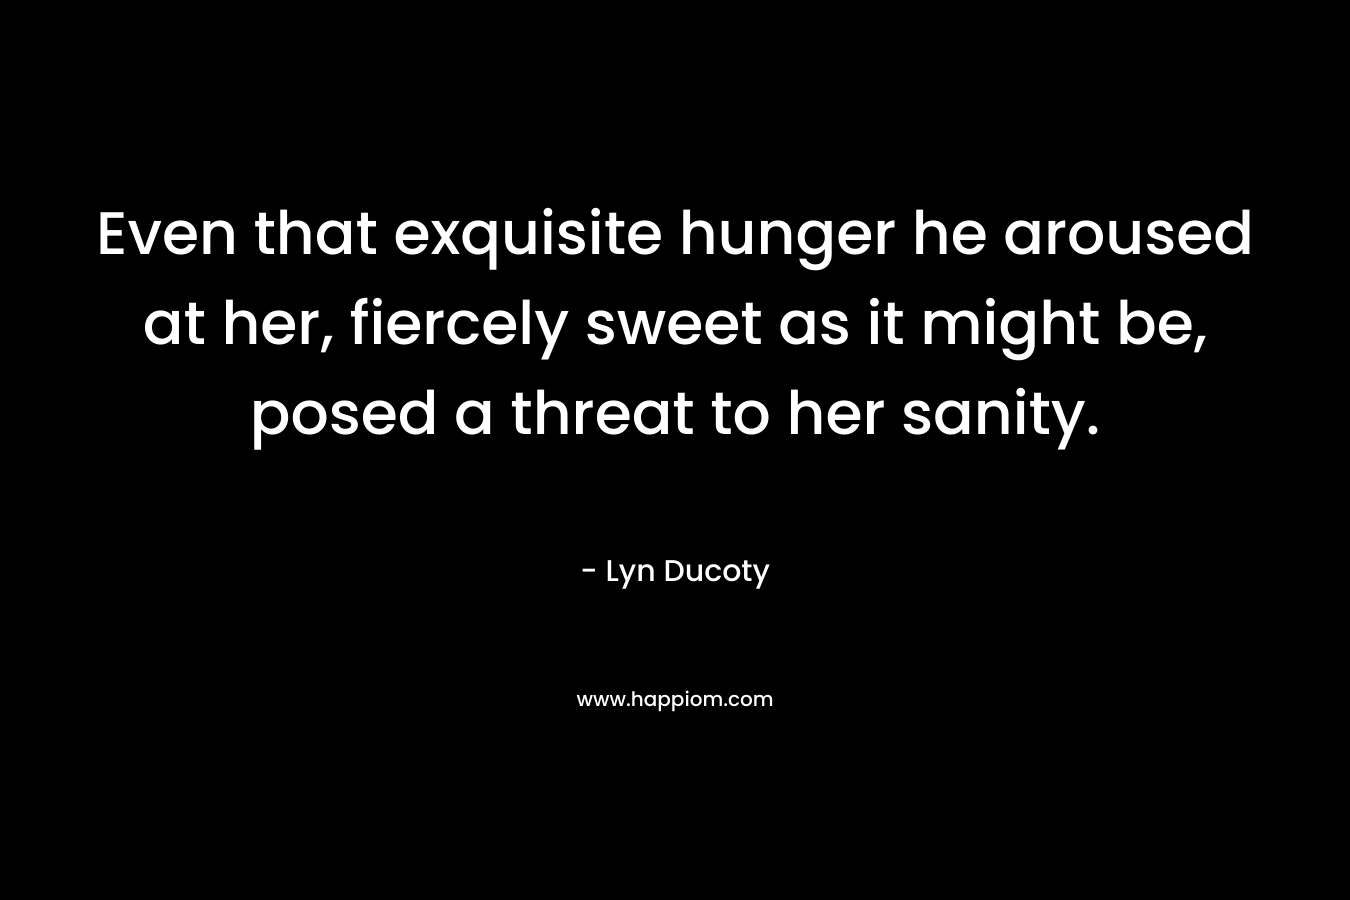 Even that exquisite hunger he aroused at her, fiercely sweet as it might be, posed a threat to her sanity. – Lyn Ducoty